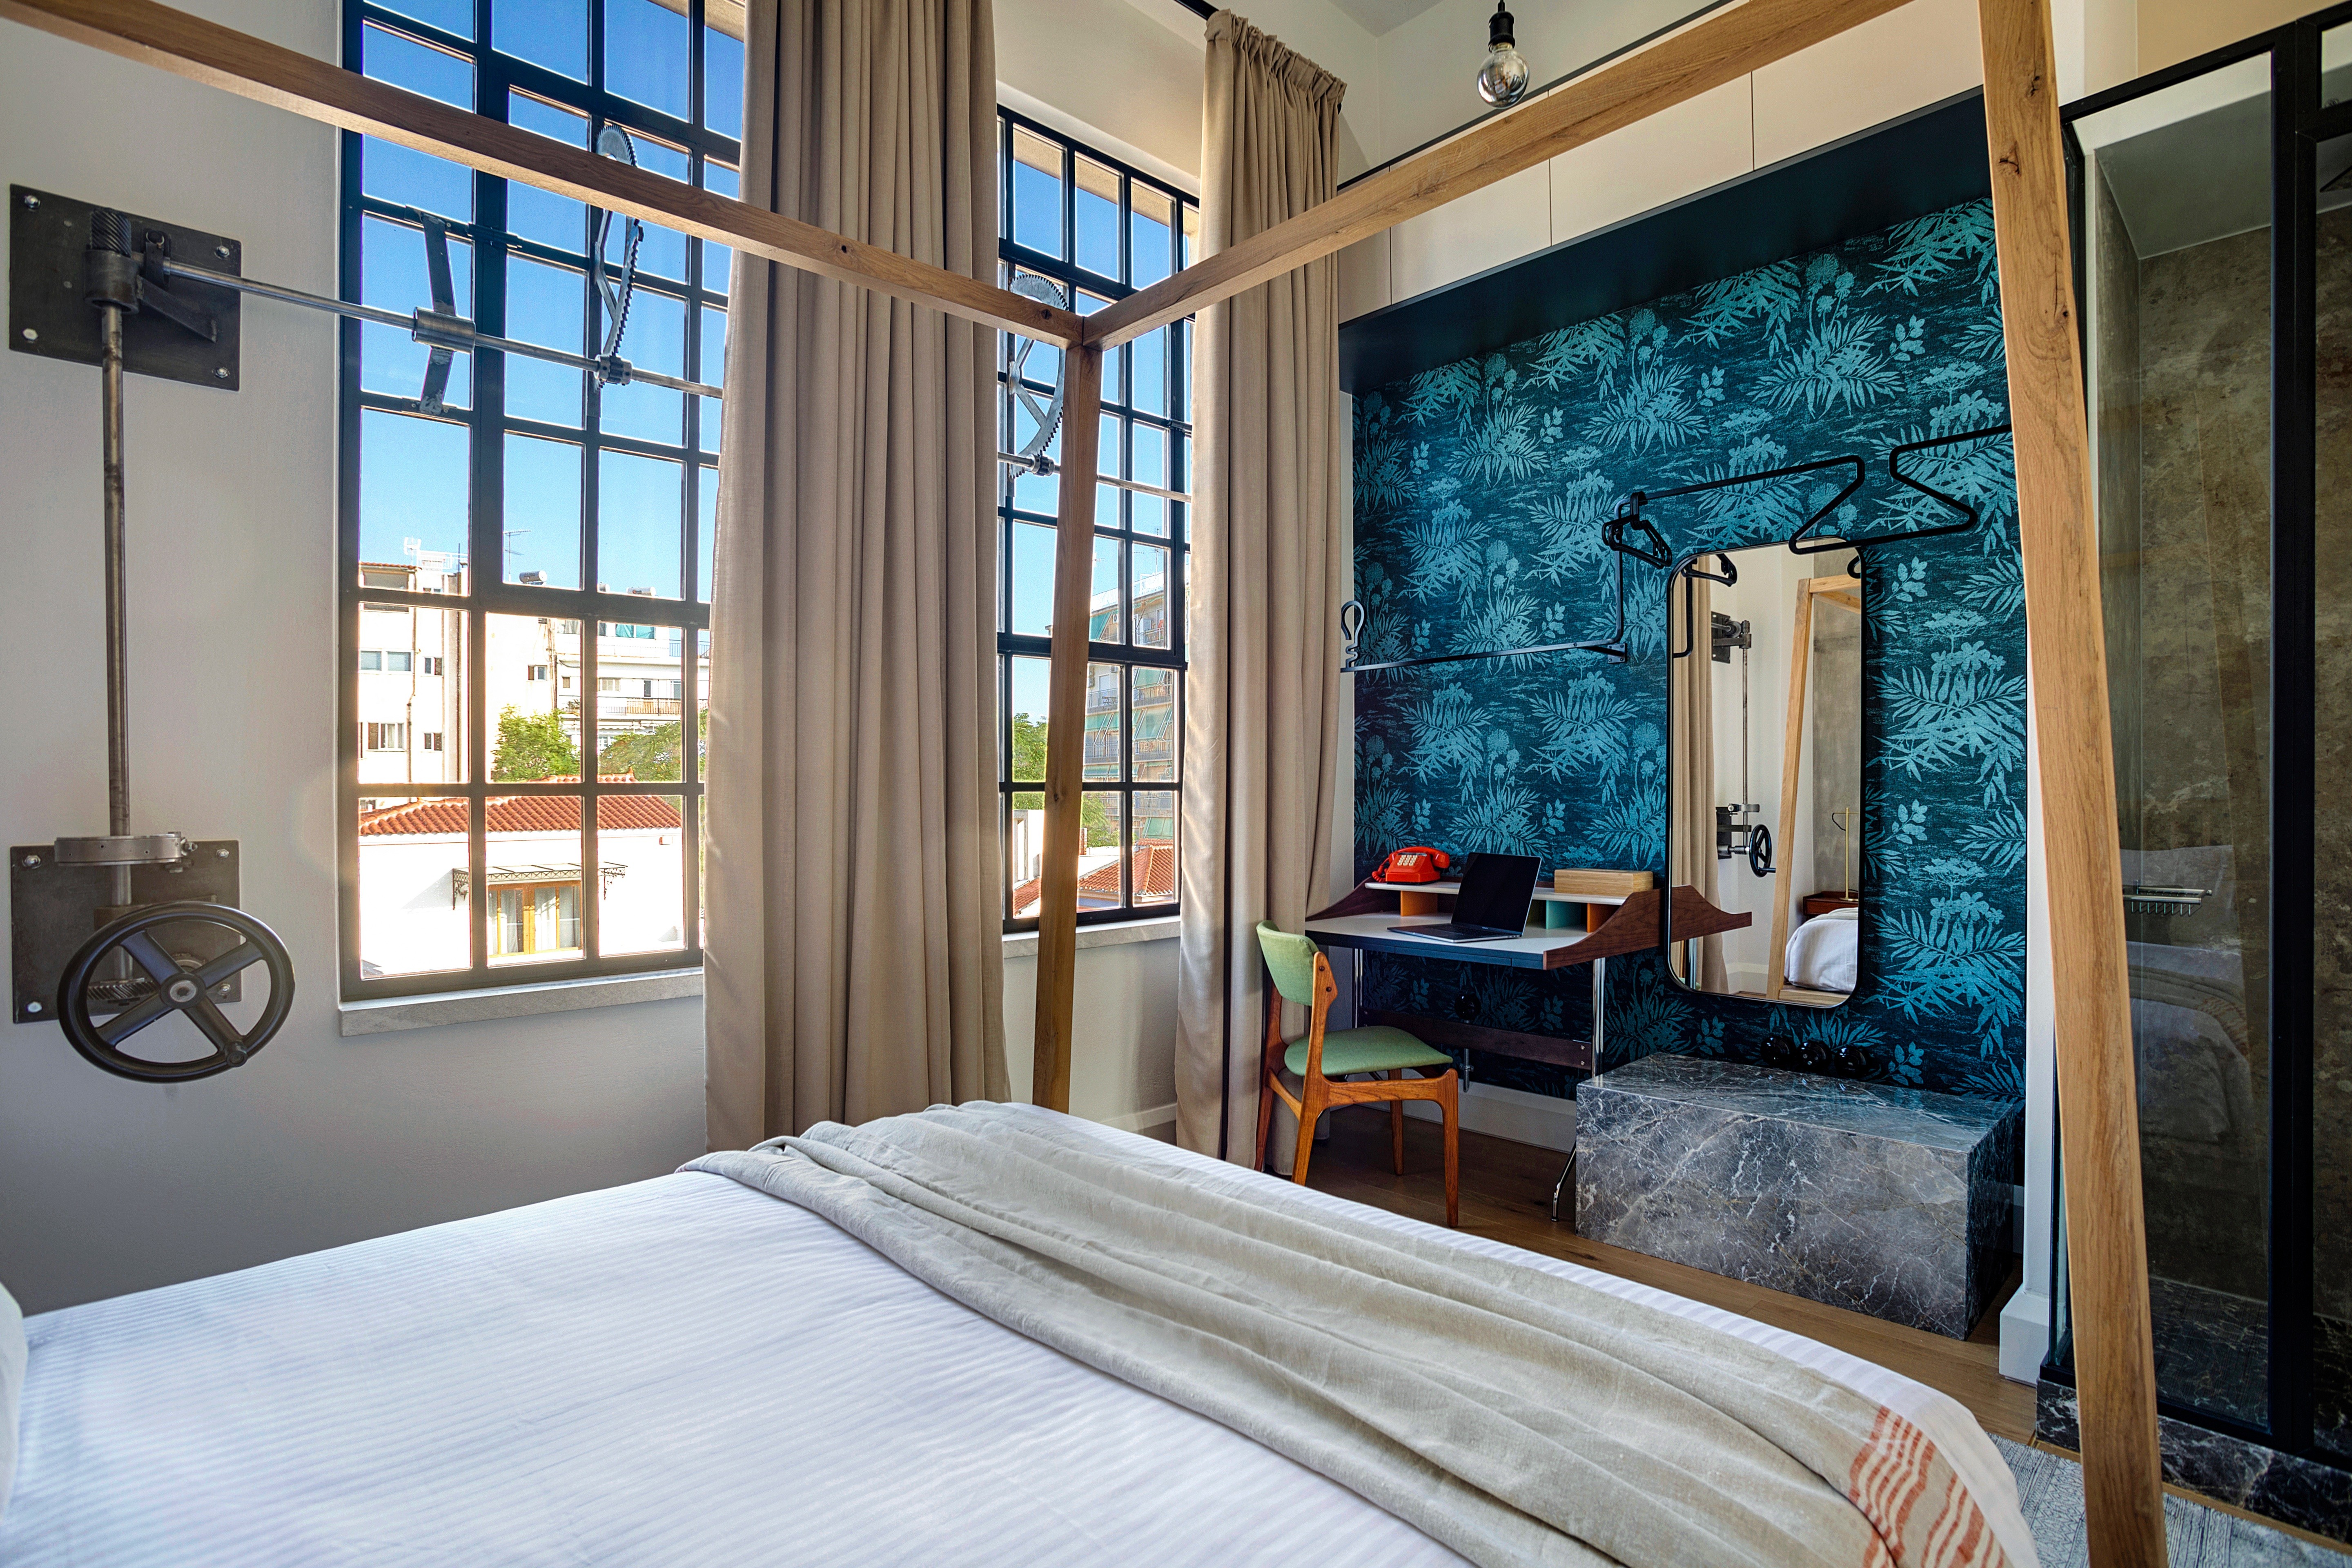 The Foundry Suites, a 12-suite boutique hotel in the Greek capital, Athens. Photo: The Foundry Suites